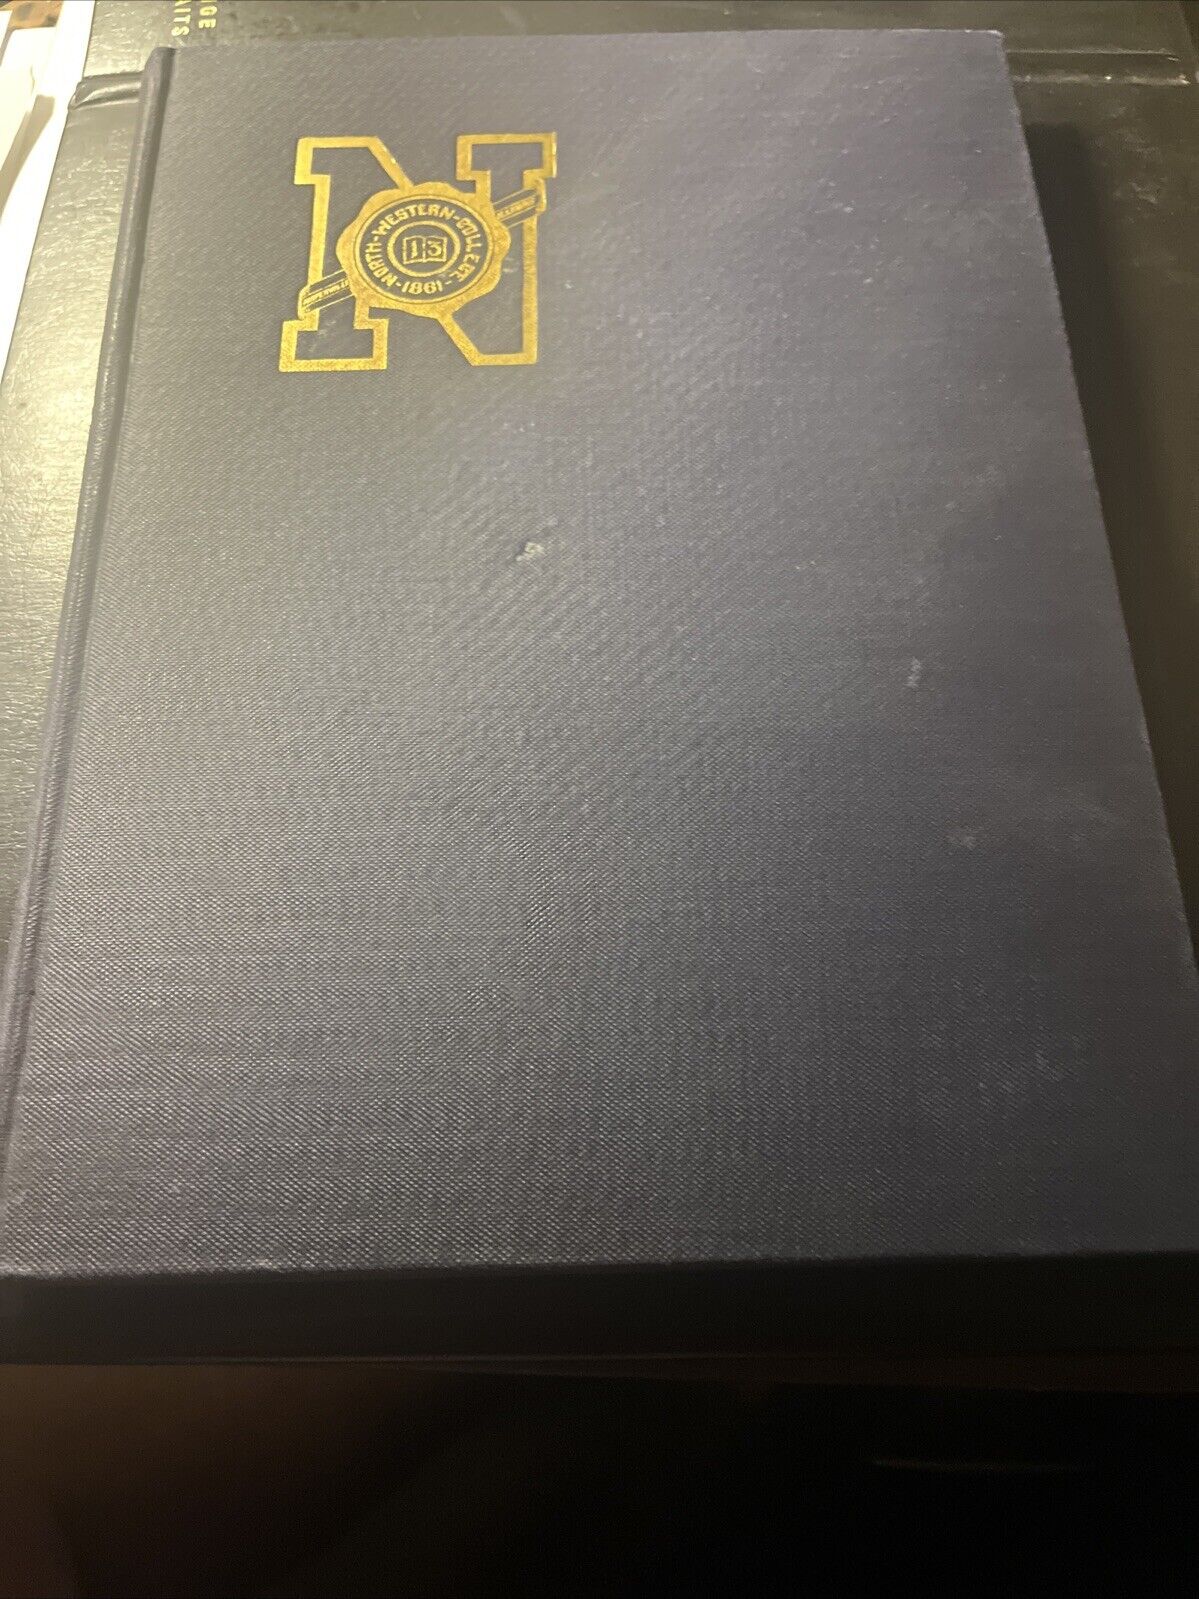 1913 Yearbook For North Western College Old And Rare Find